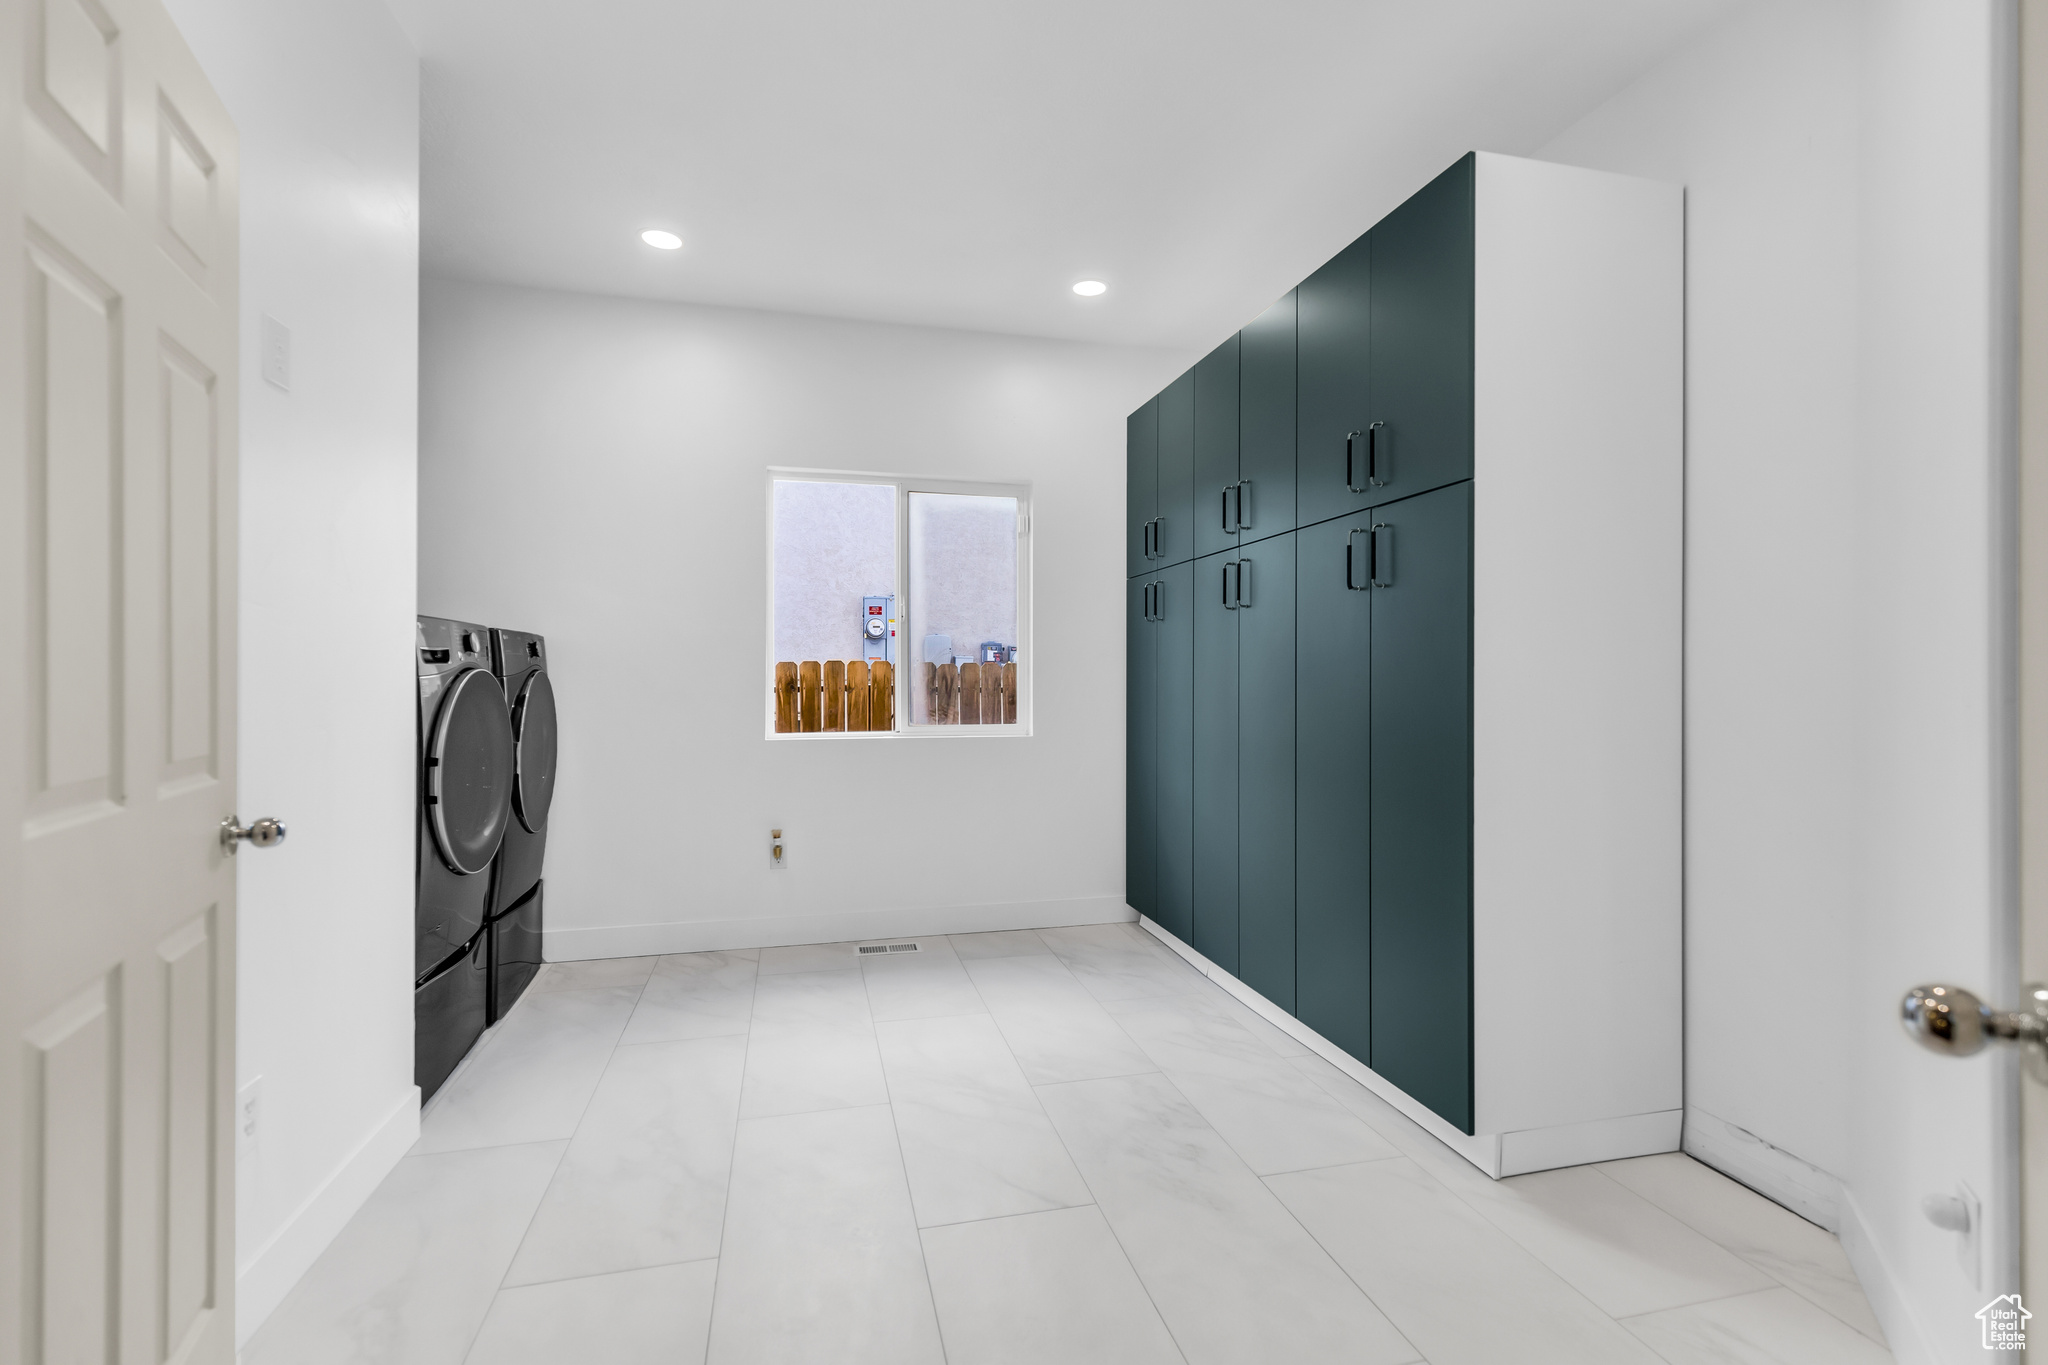 Hall with light tile flooring and washer and dryer